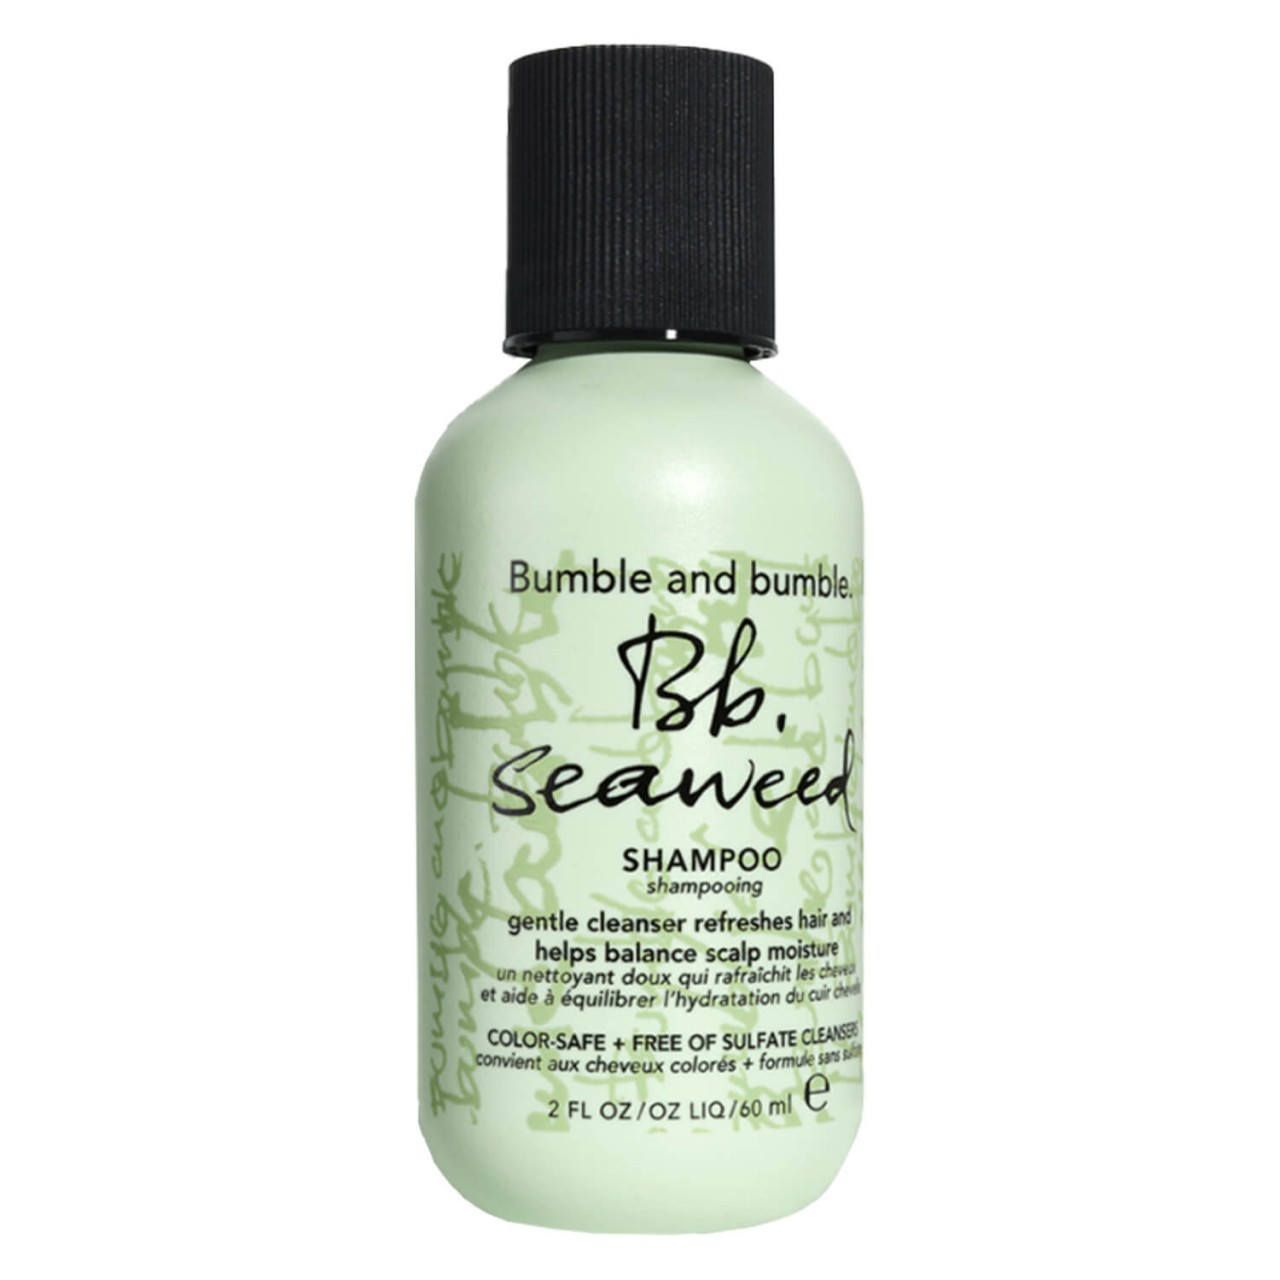 Bb. Seaweed - Shampoo light von Bumble and bumble.